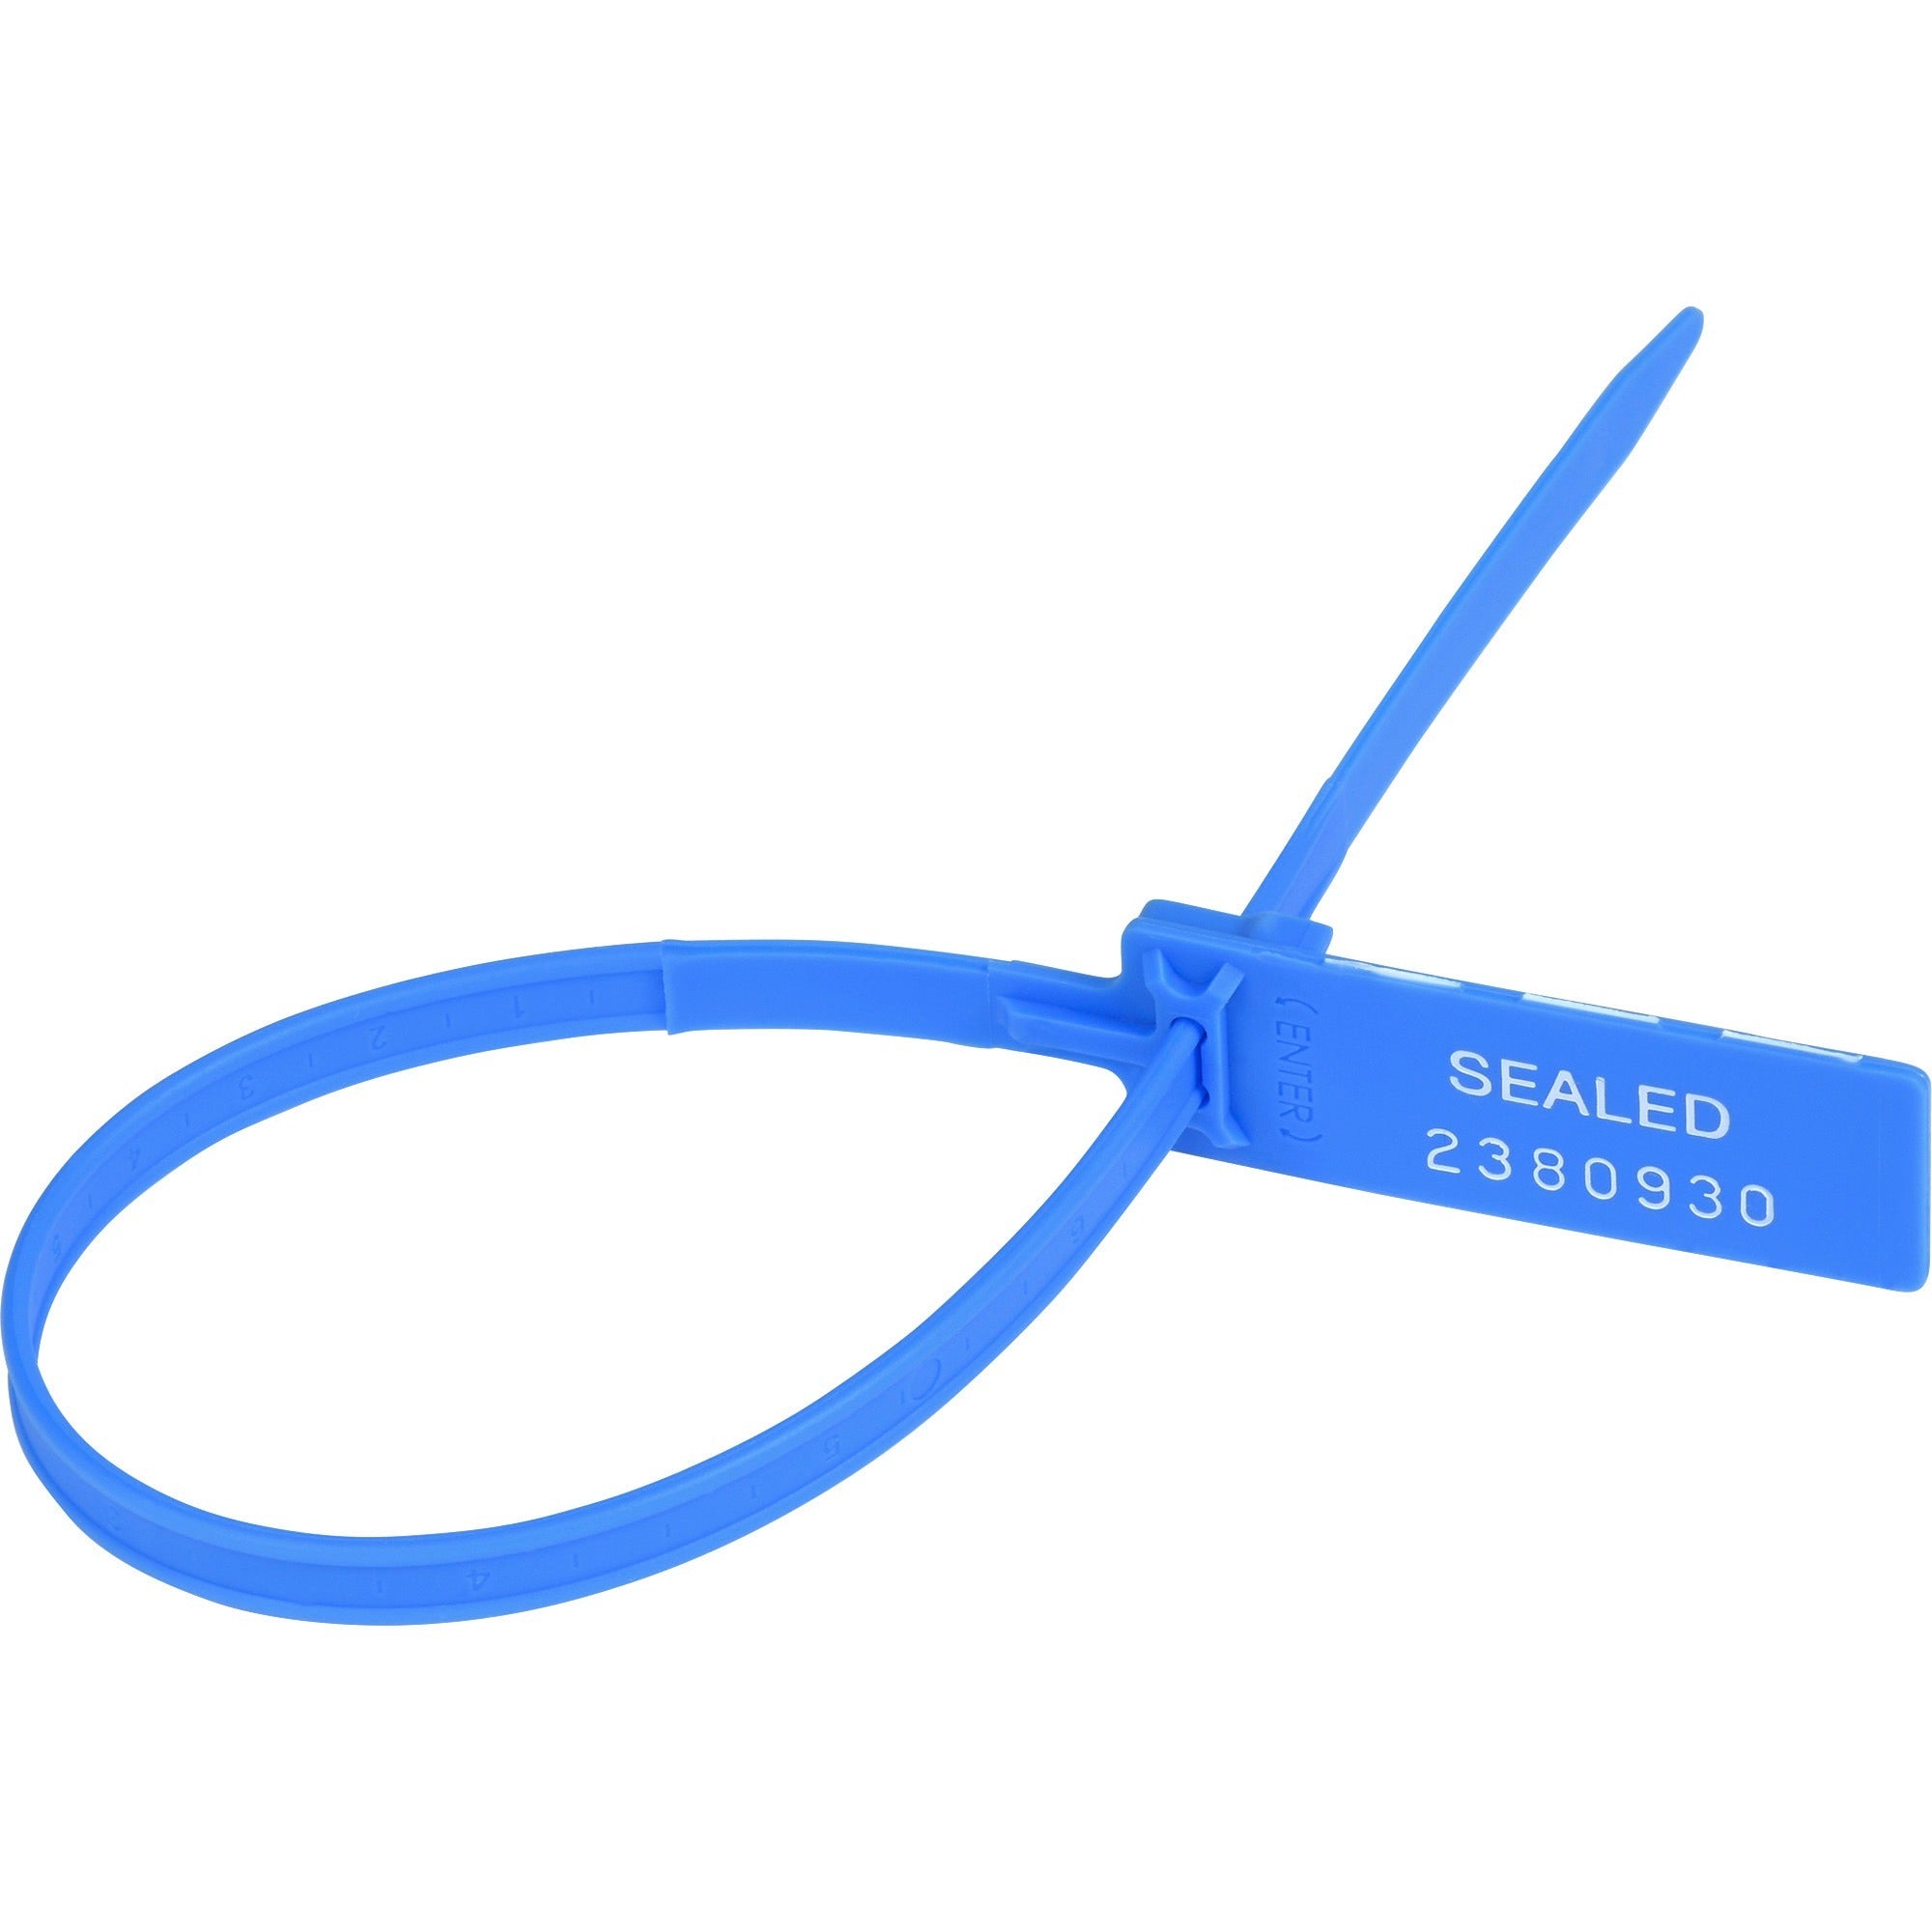 tatco-security-seals-03-width-135-length-blue-100-pack_tco26300 - 1